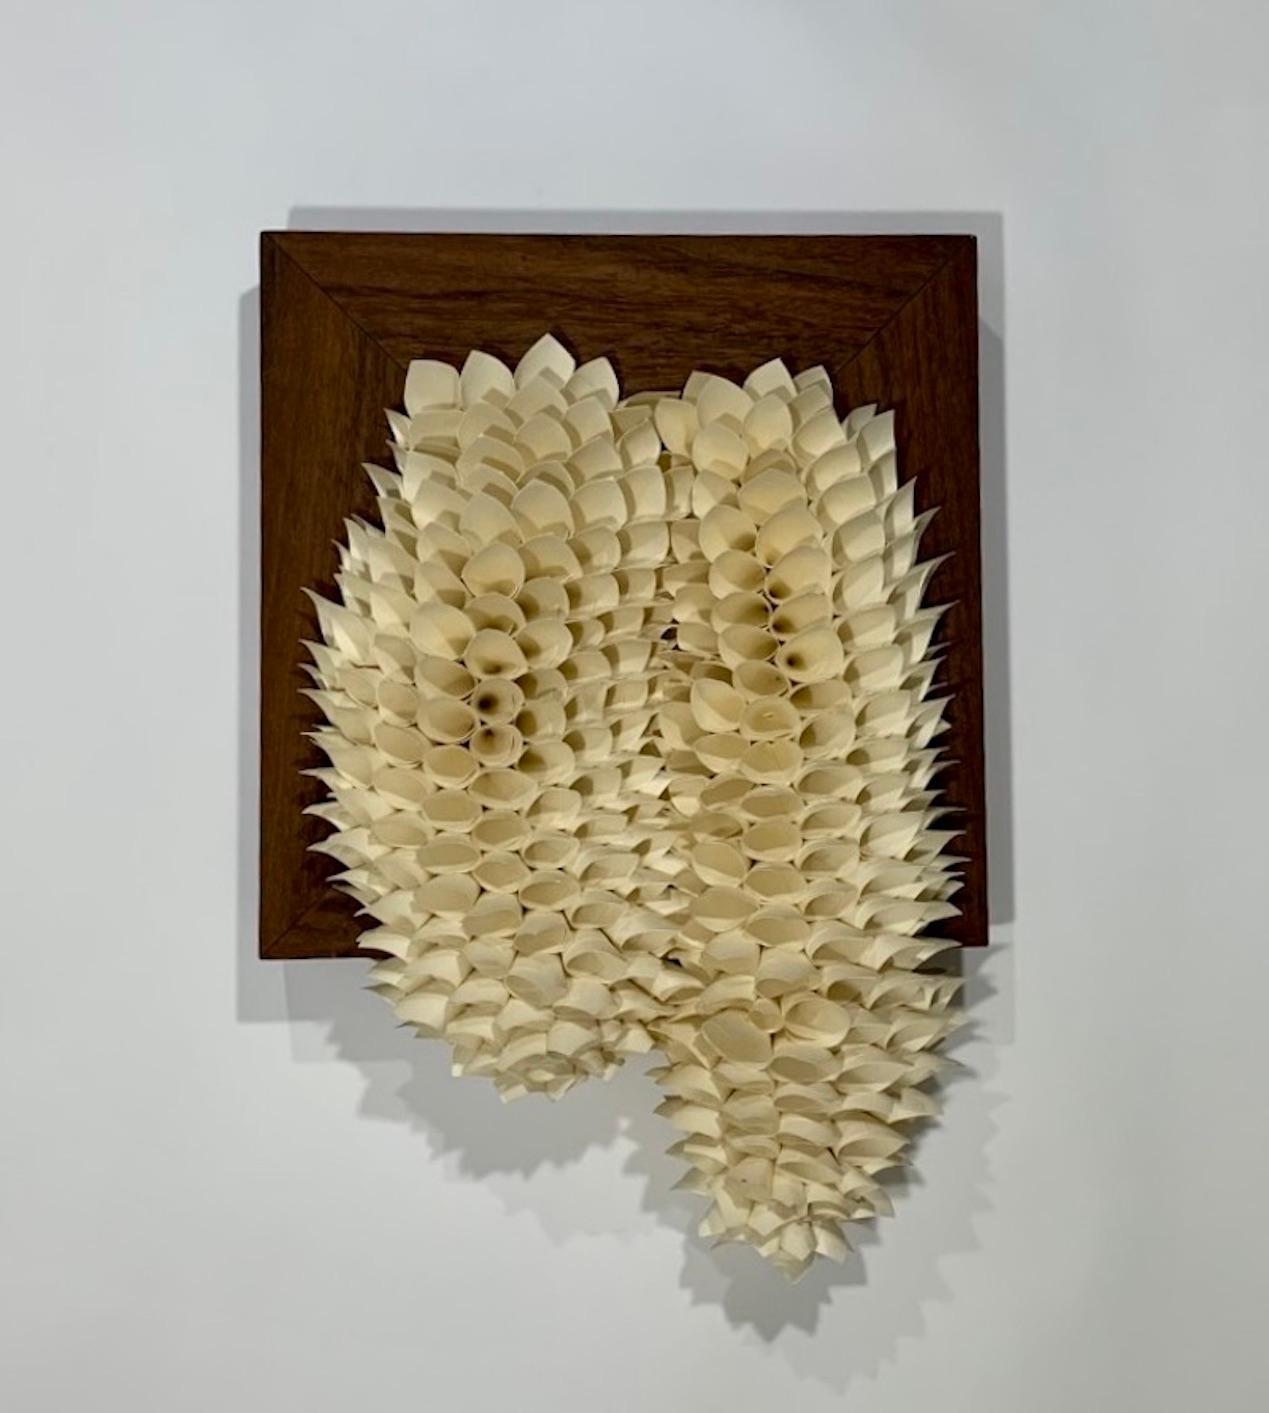 Paper Sculpture. Wall Hanging: 'Untitled Framed' - Mixed Media Art by Samuelle Green